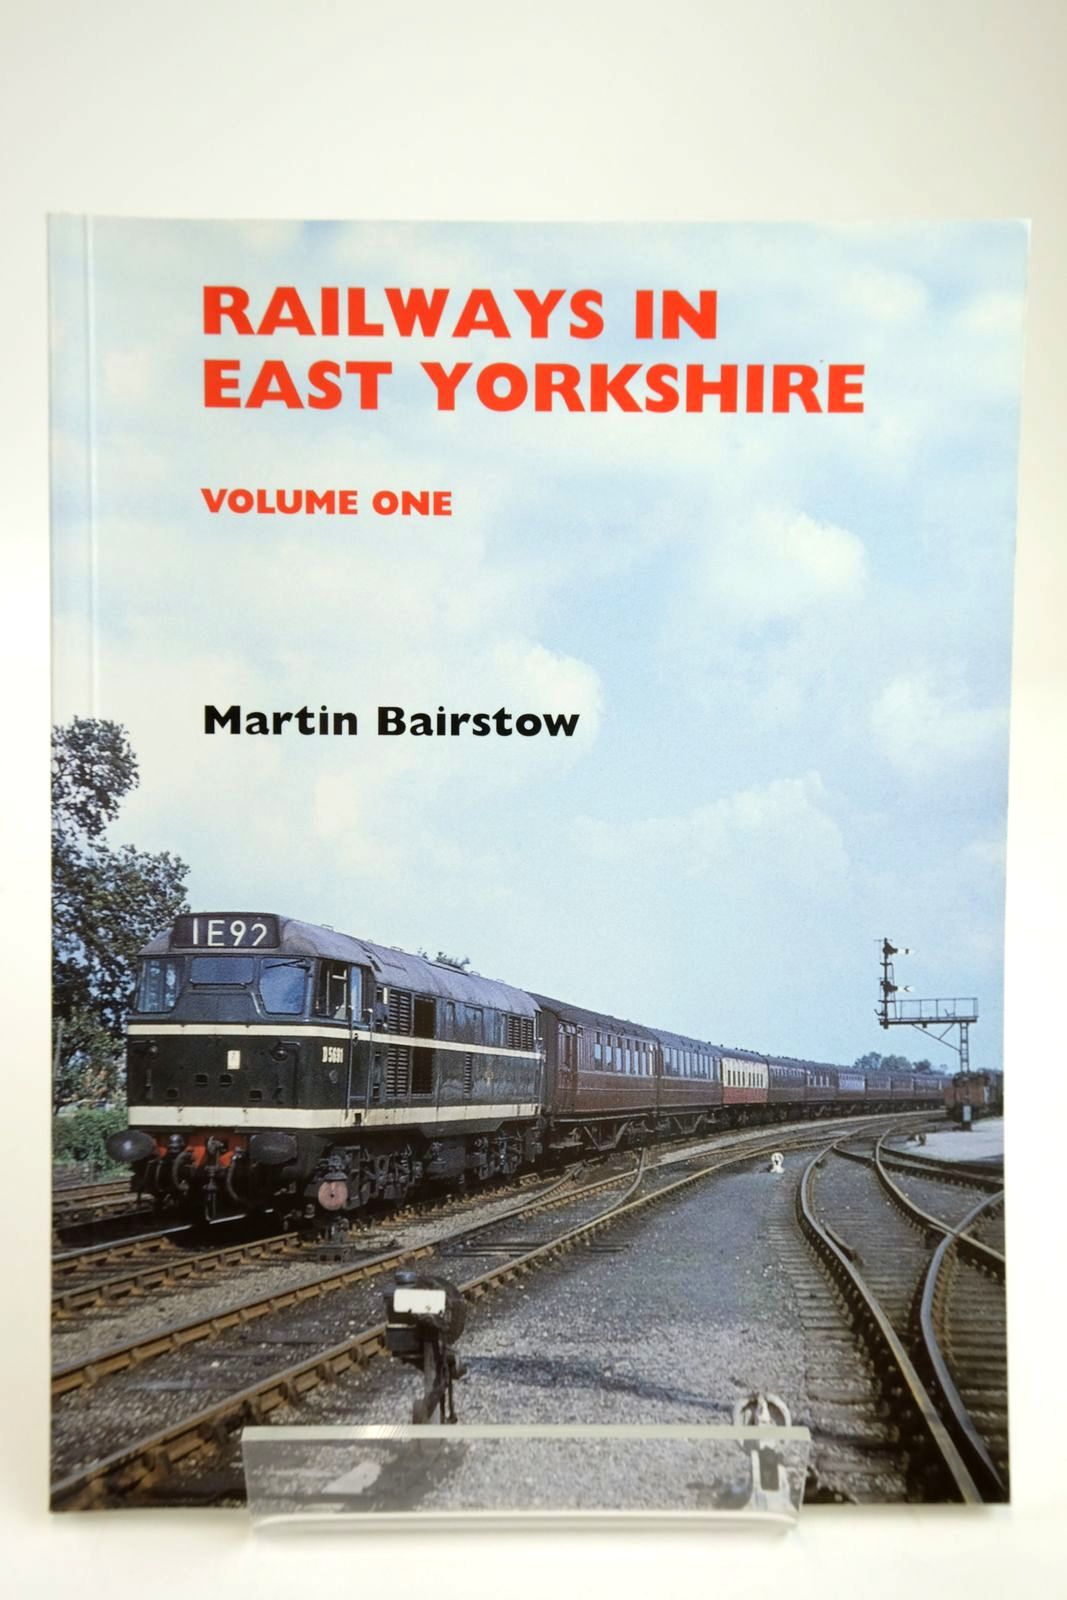 Photo of RAILWAYS IN EAST YORKSHIRE VOLUME ONE written by Bairstow, Martin published by Martin Bairstow (STOCK CODE: 2133704)  for sale by Stella & Rose's Books